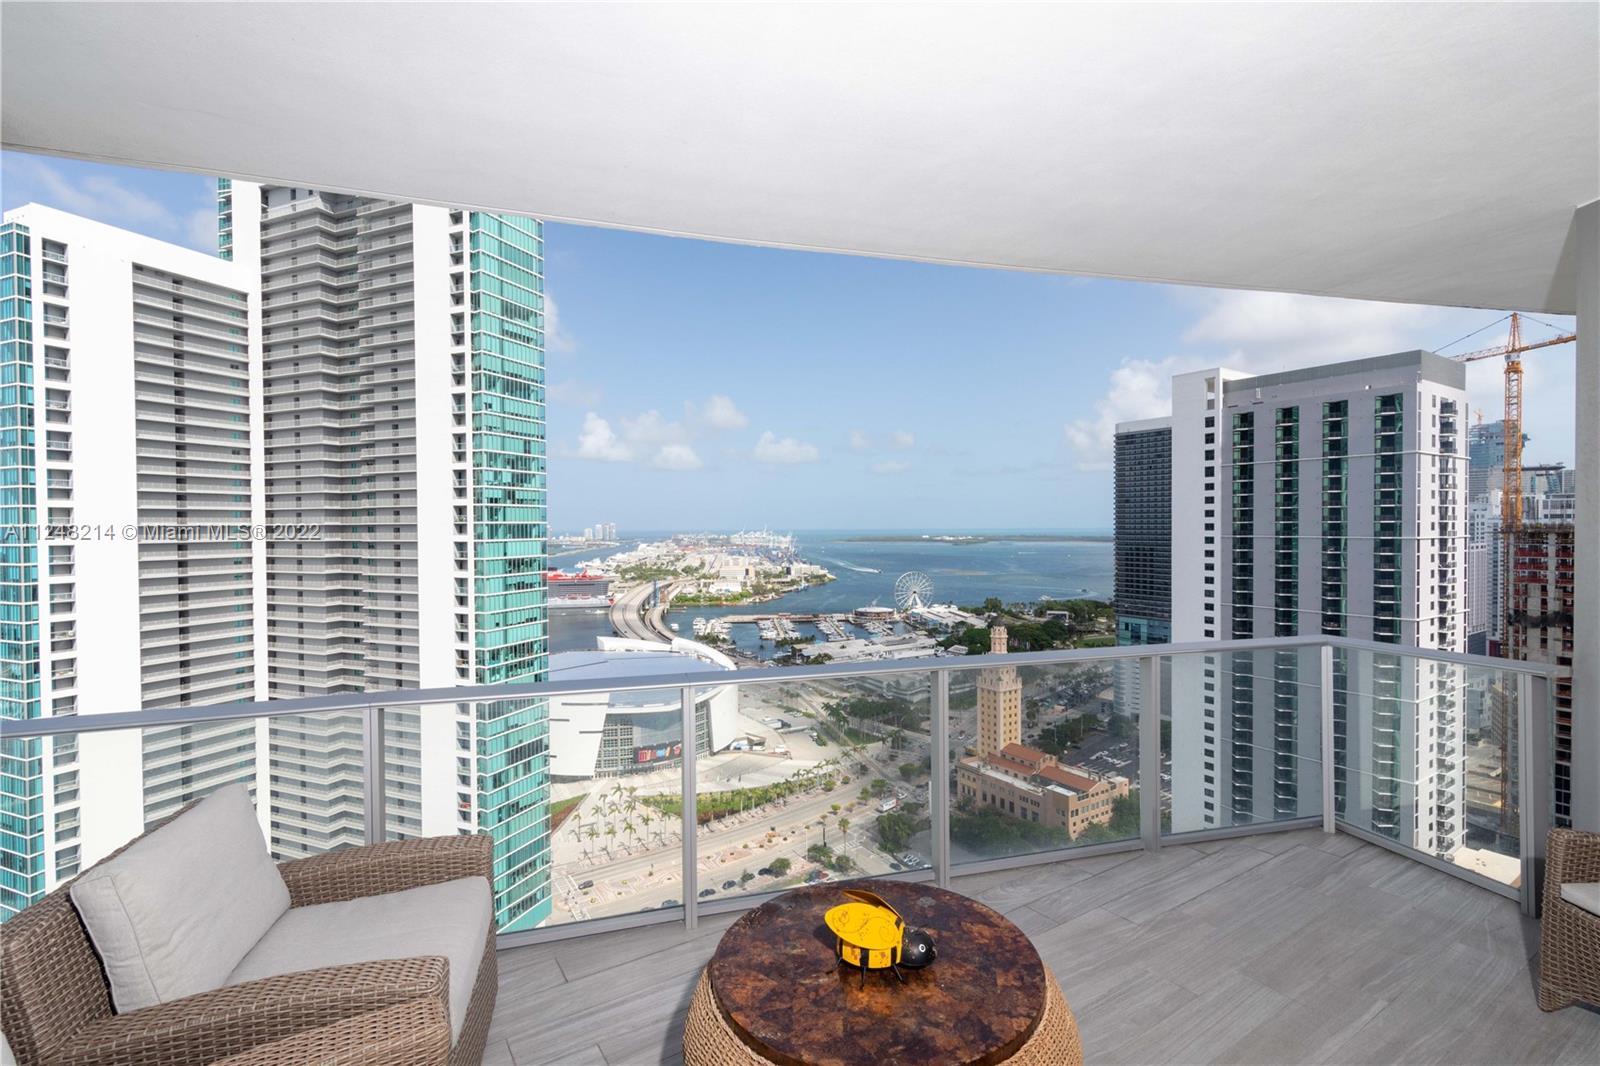 Spectacular view from desirable 09 line in Luxury Paramount Miami Worldcenter, 3 full baths + den, 1